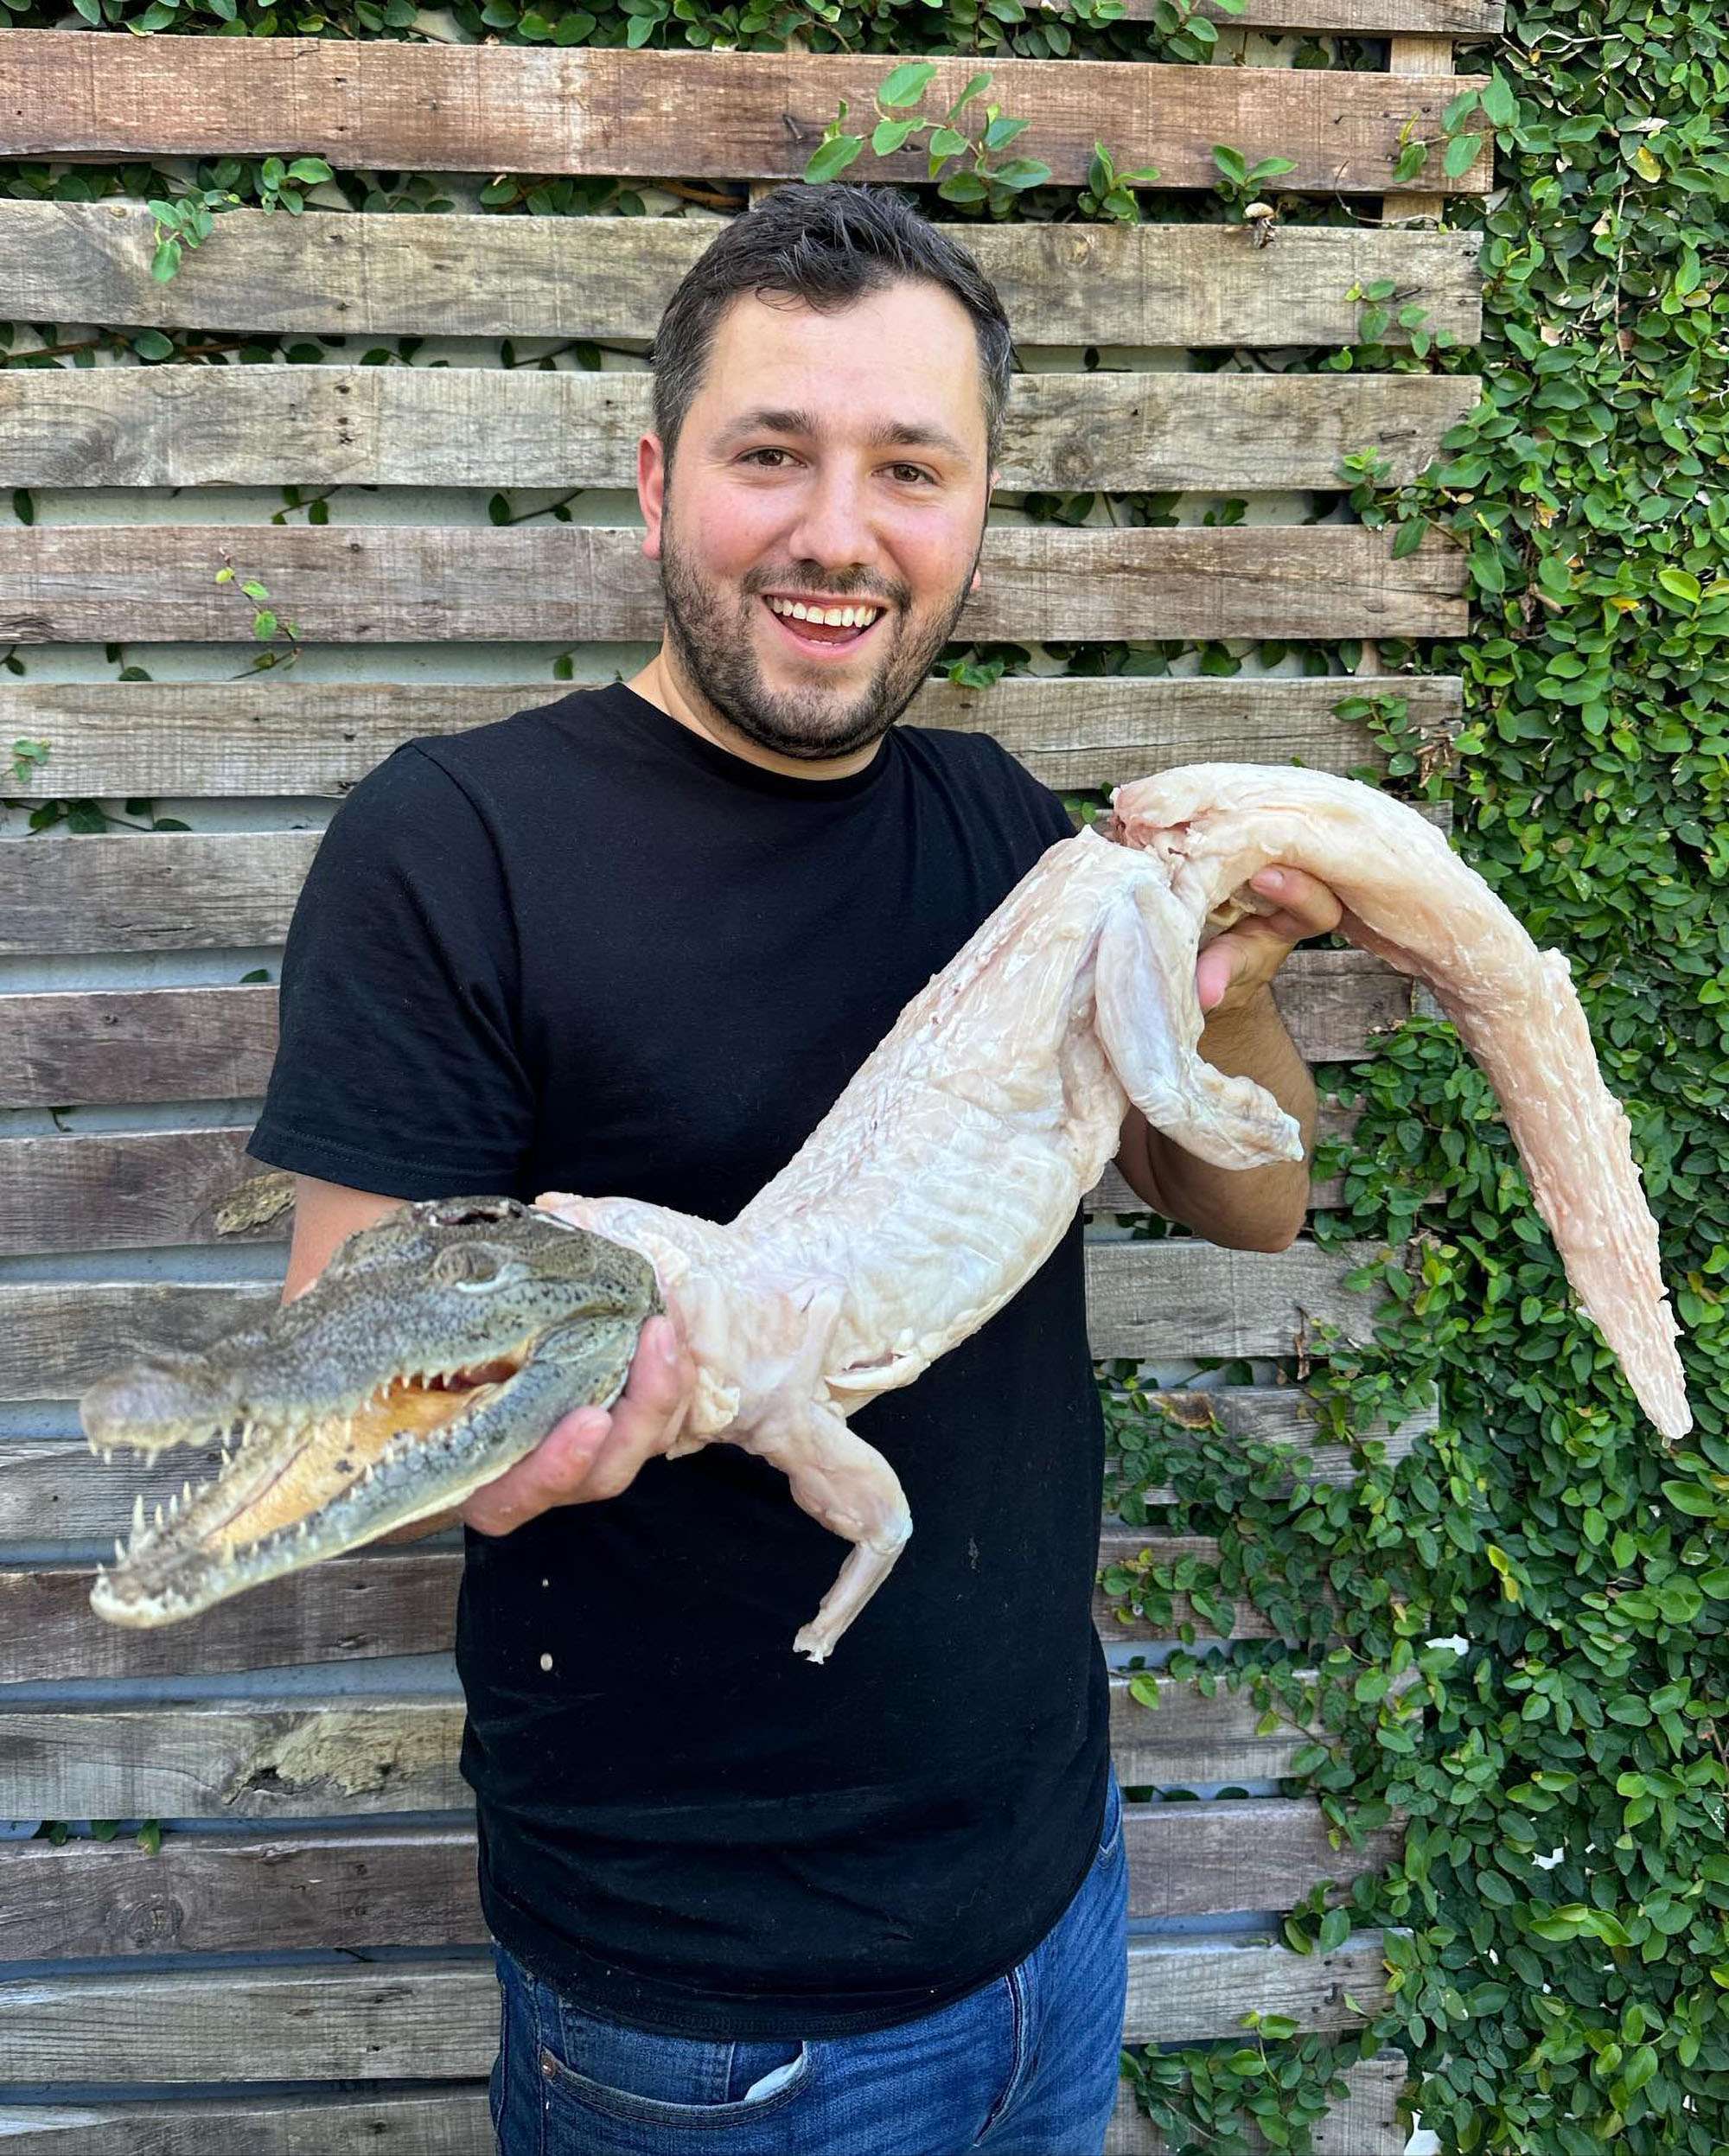  Influencer Chef Under Fire For Barbecuing Crocodile